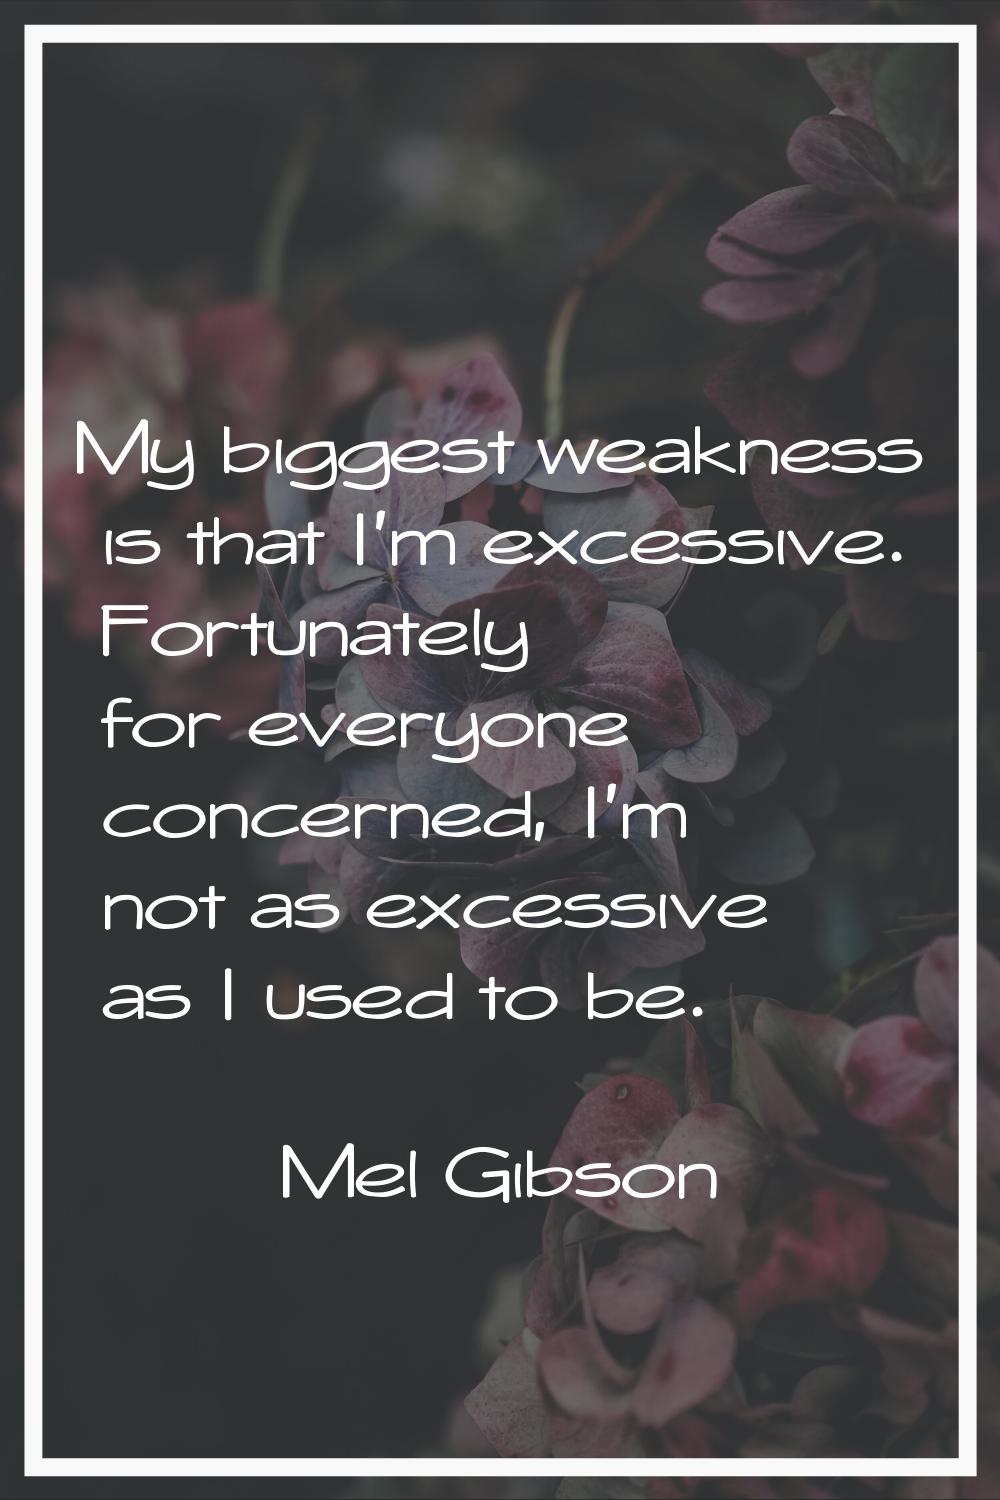 My biggest weakness is that I'm excessive. Fortunately for everyone concerned, I'm not as excessive